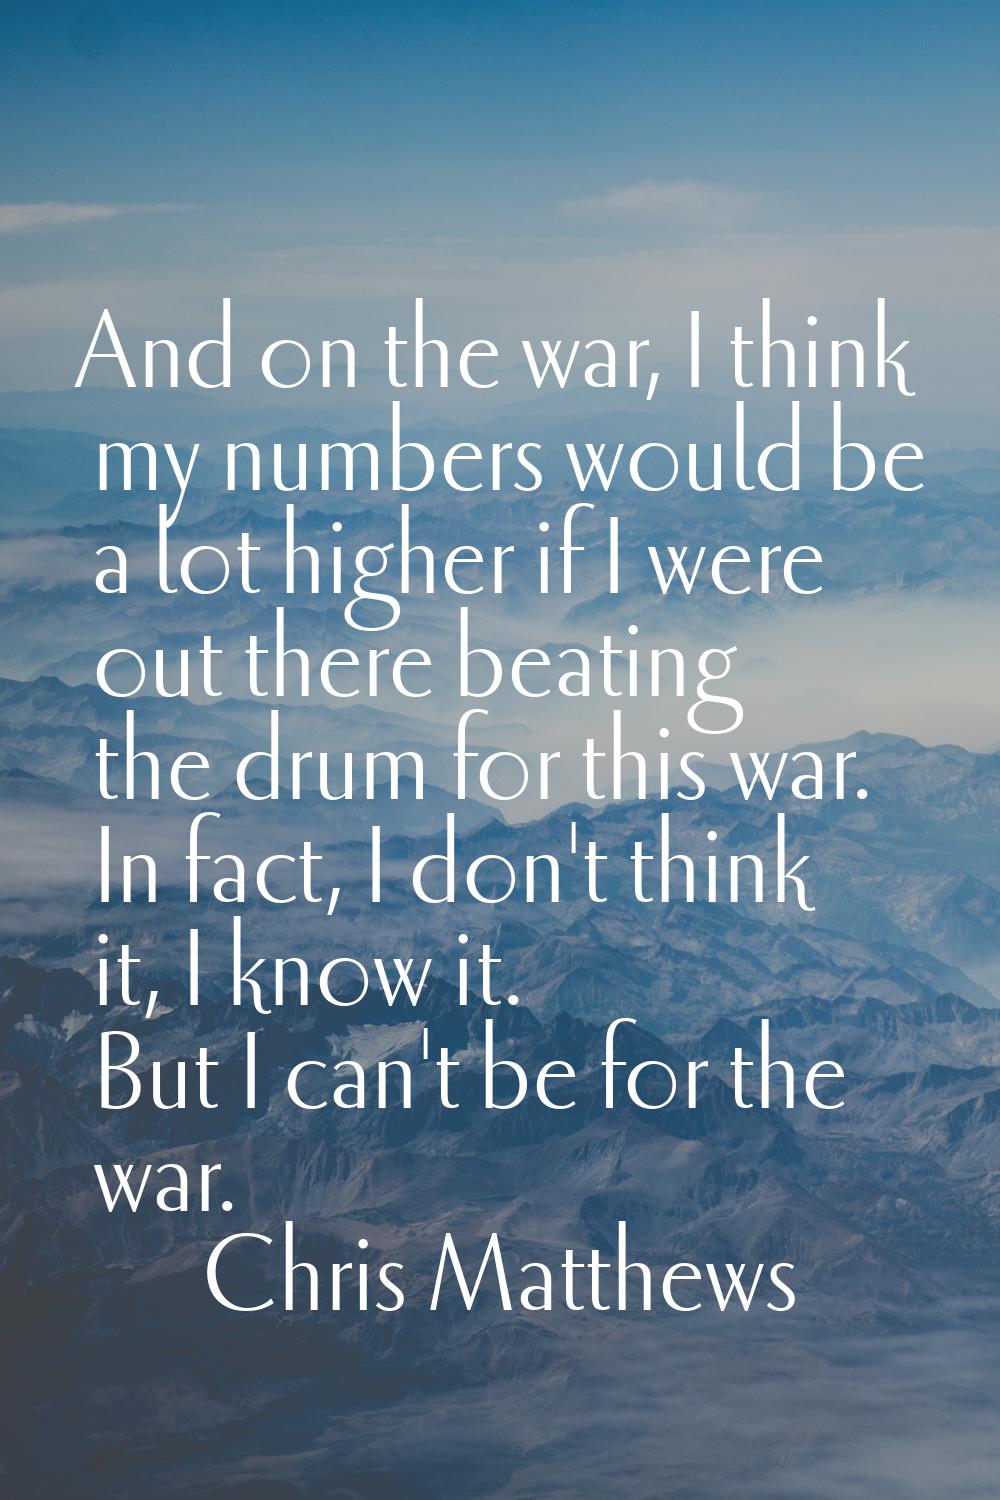 And on the war, I think my numbers would be a lot higher if I were out there beating the drum for t